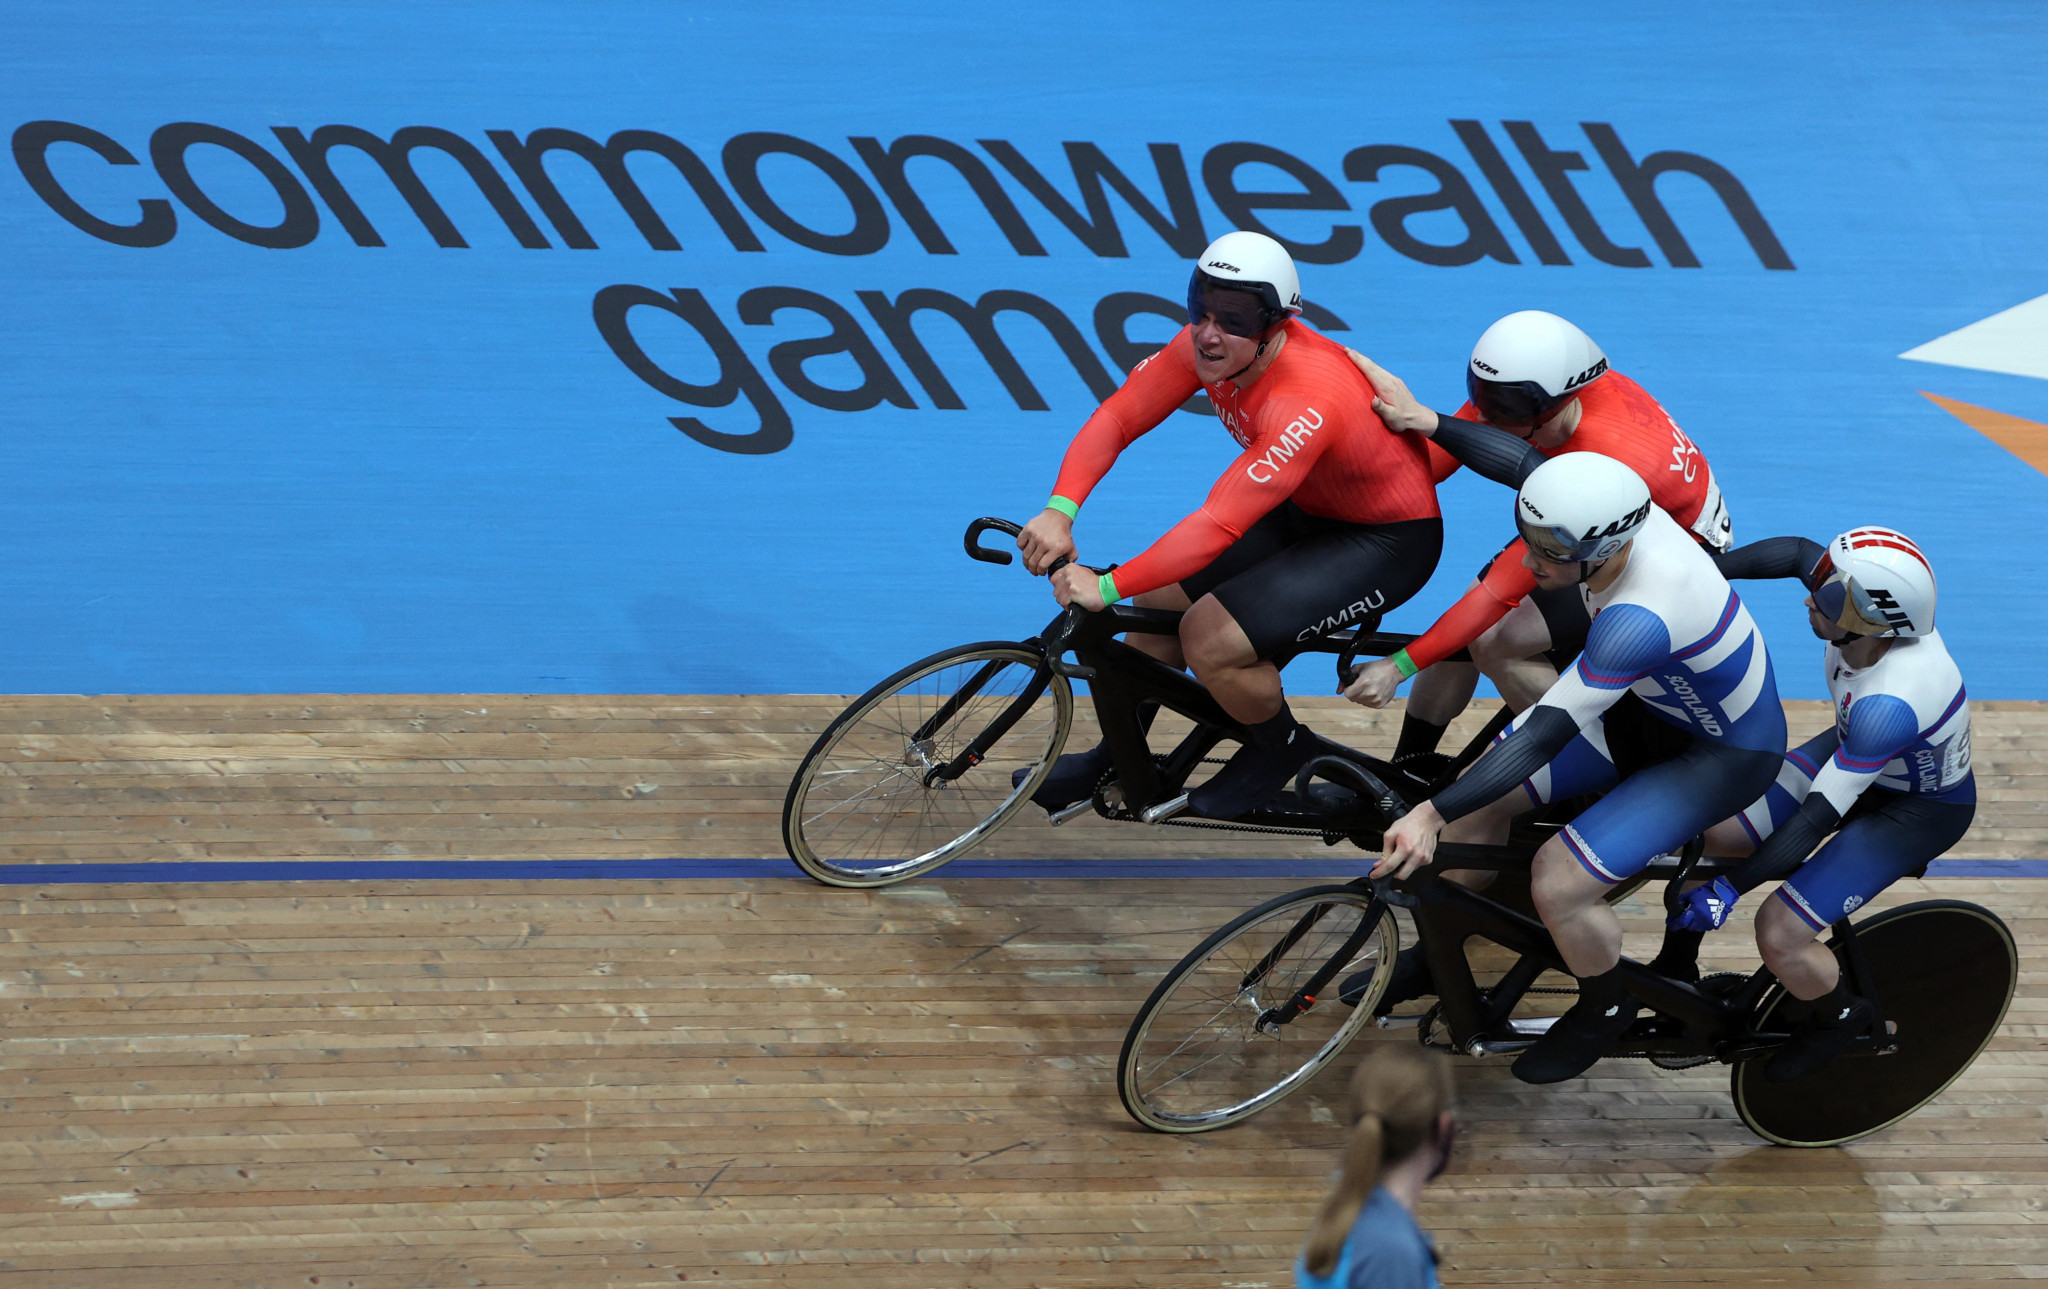 Scotland congratulating Wales today in the men's scratch race ©Getty Images